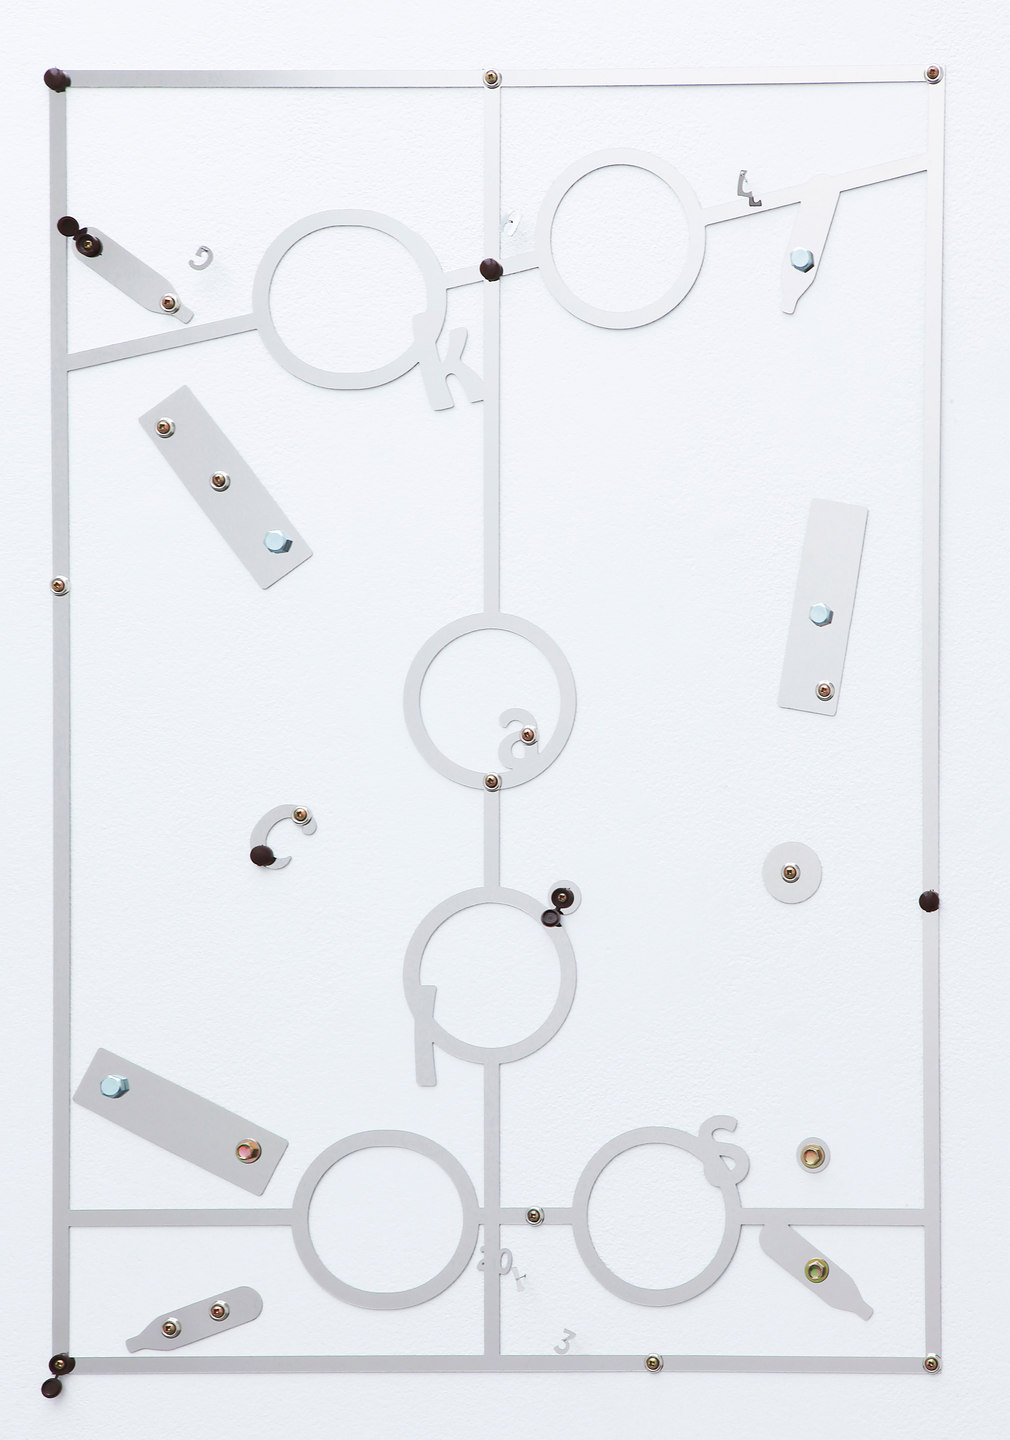 George Henry Longly, Calorie Counter (Weight Watchers), 2013, mirror polished steel, coach bolts, screws, screw caps, 55 x 80 x 1 cm, Cell Project Space